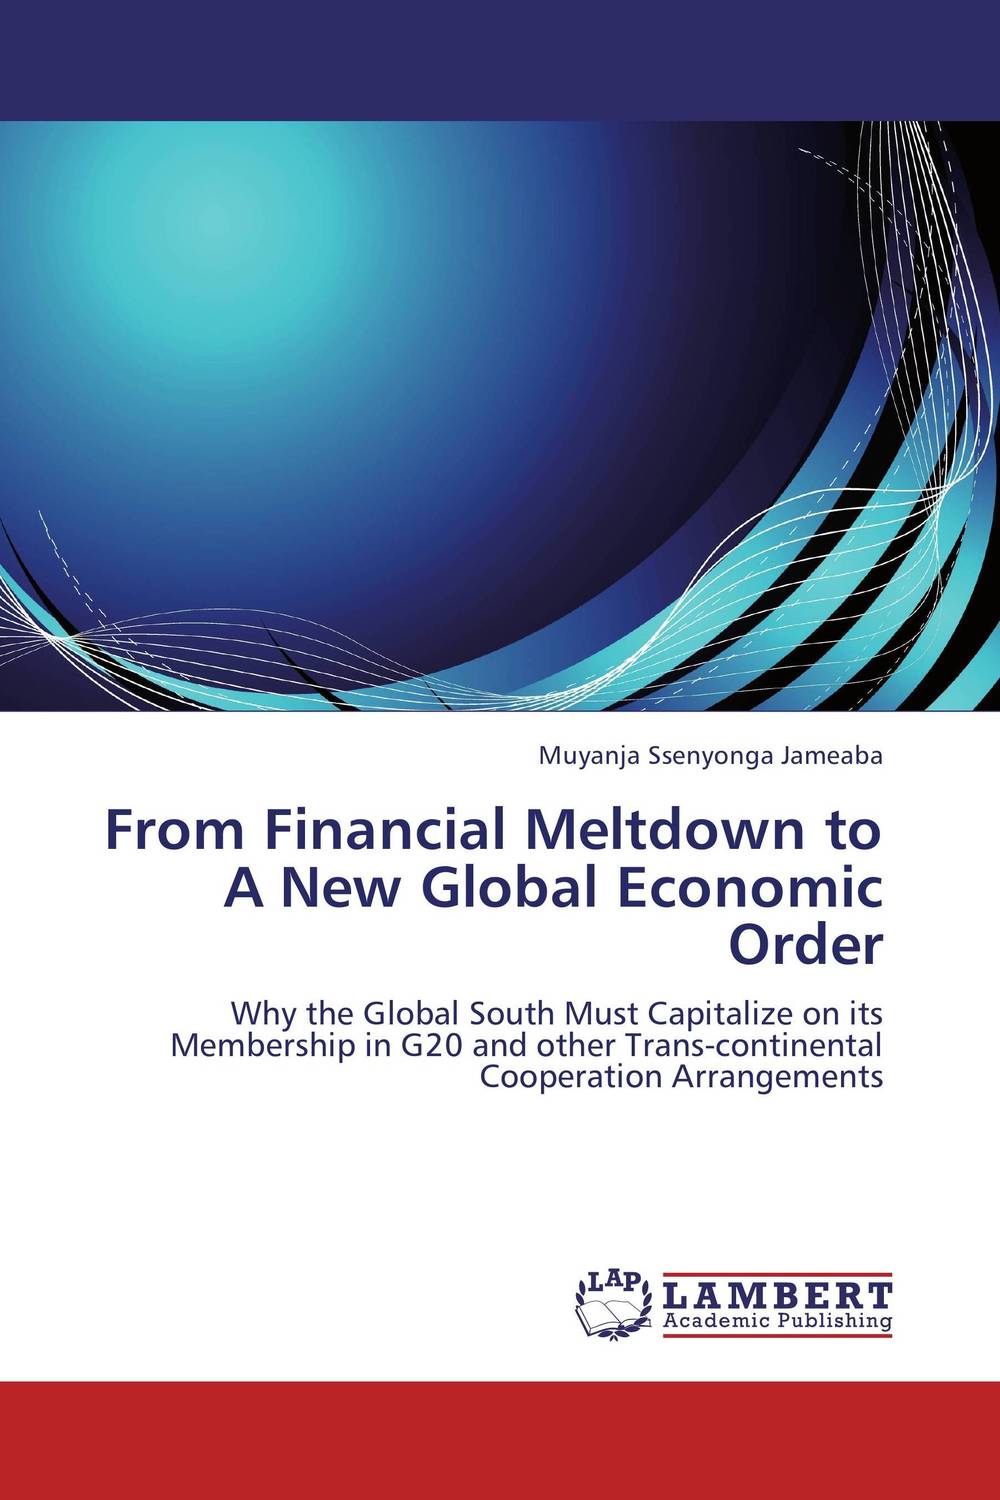 From Financial Meltdown to A New Global Economic Order